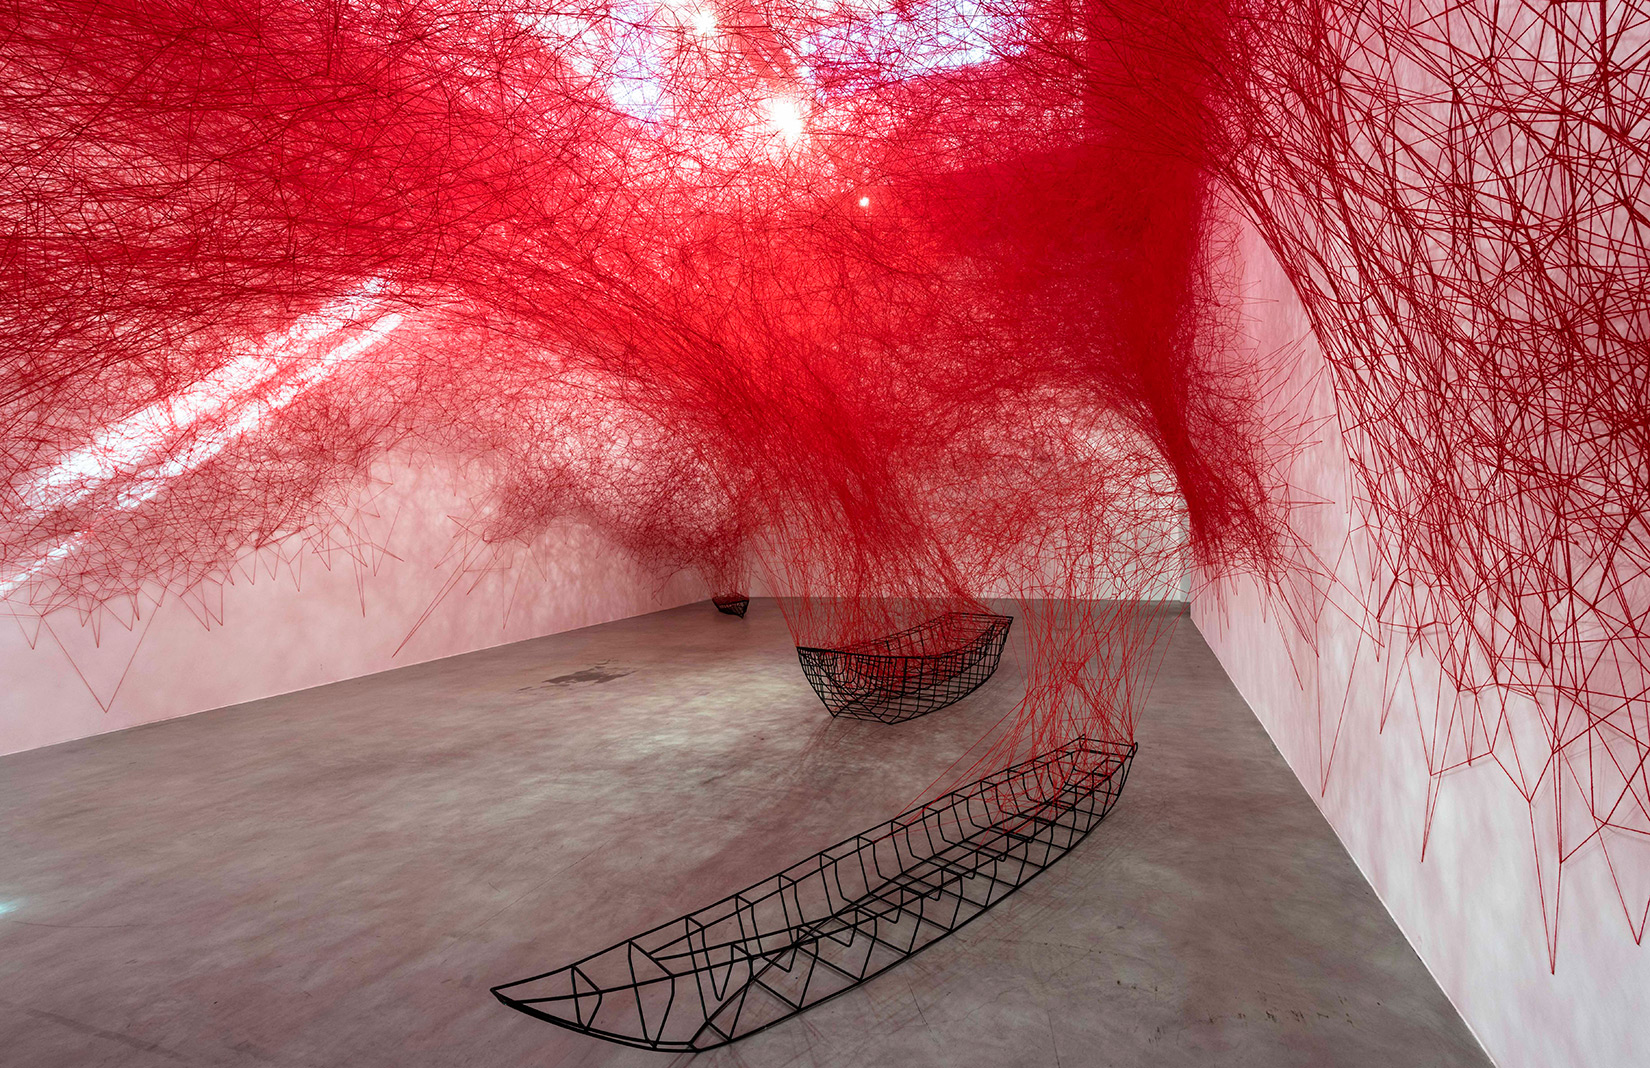 Chiharu Shiota, Uncertain Journey, 2016. Installation view, courtesy of the artist and Blain|Southern. Photography: Christian Glaeser